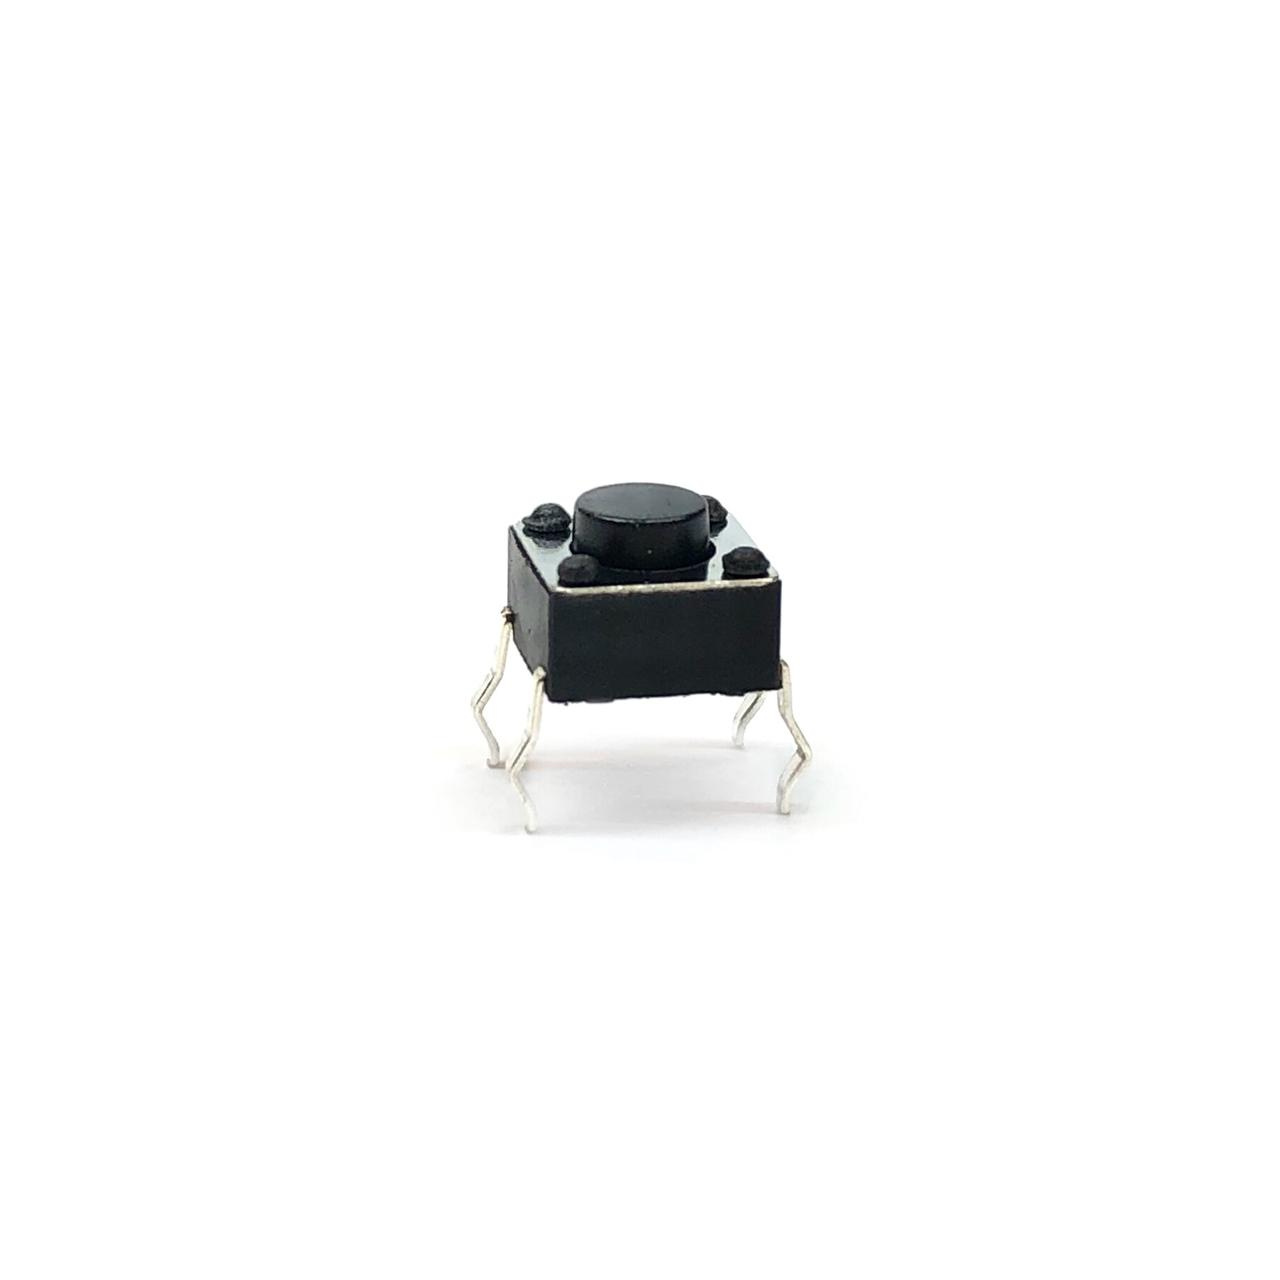 CHAVE TACT SWITCH 6X6X4,3MM 180 GRAUS